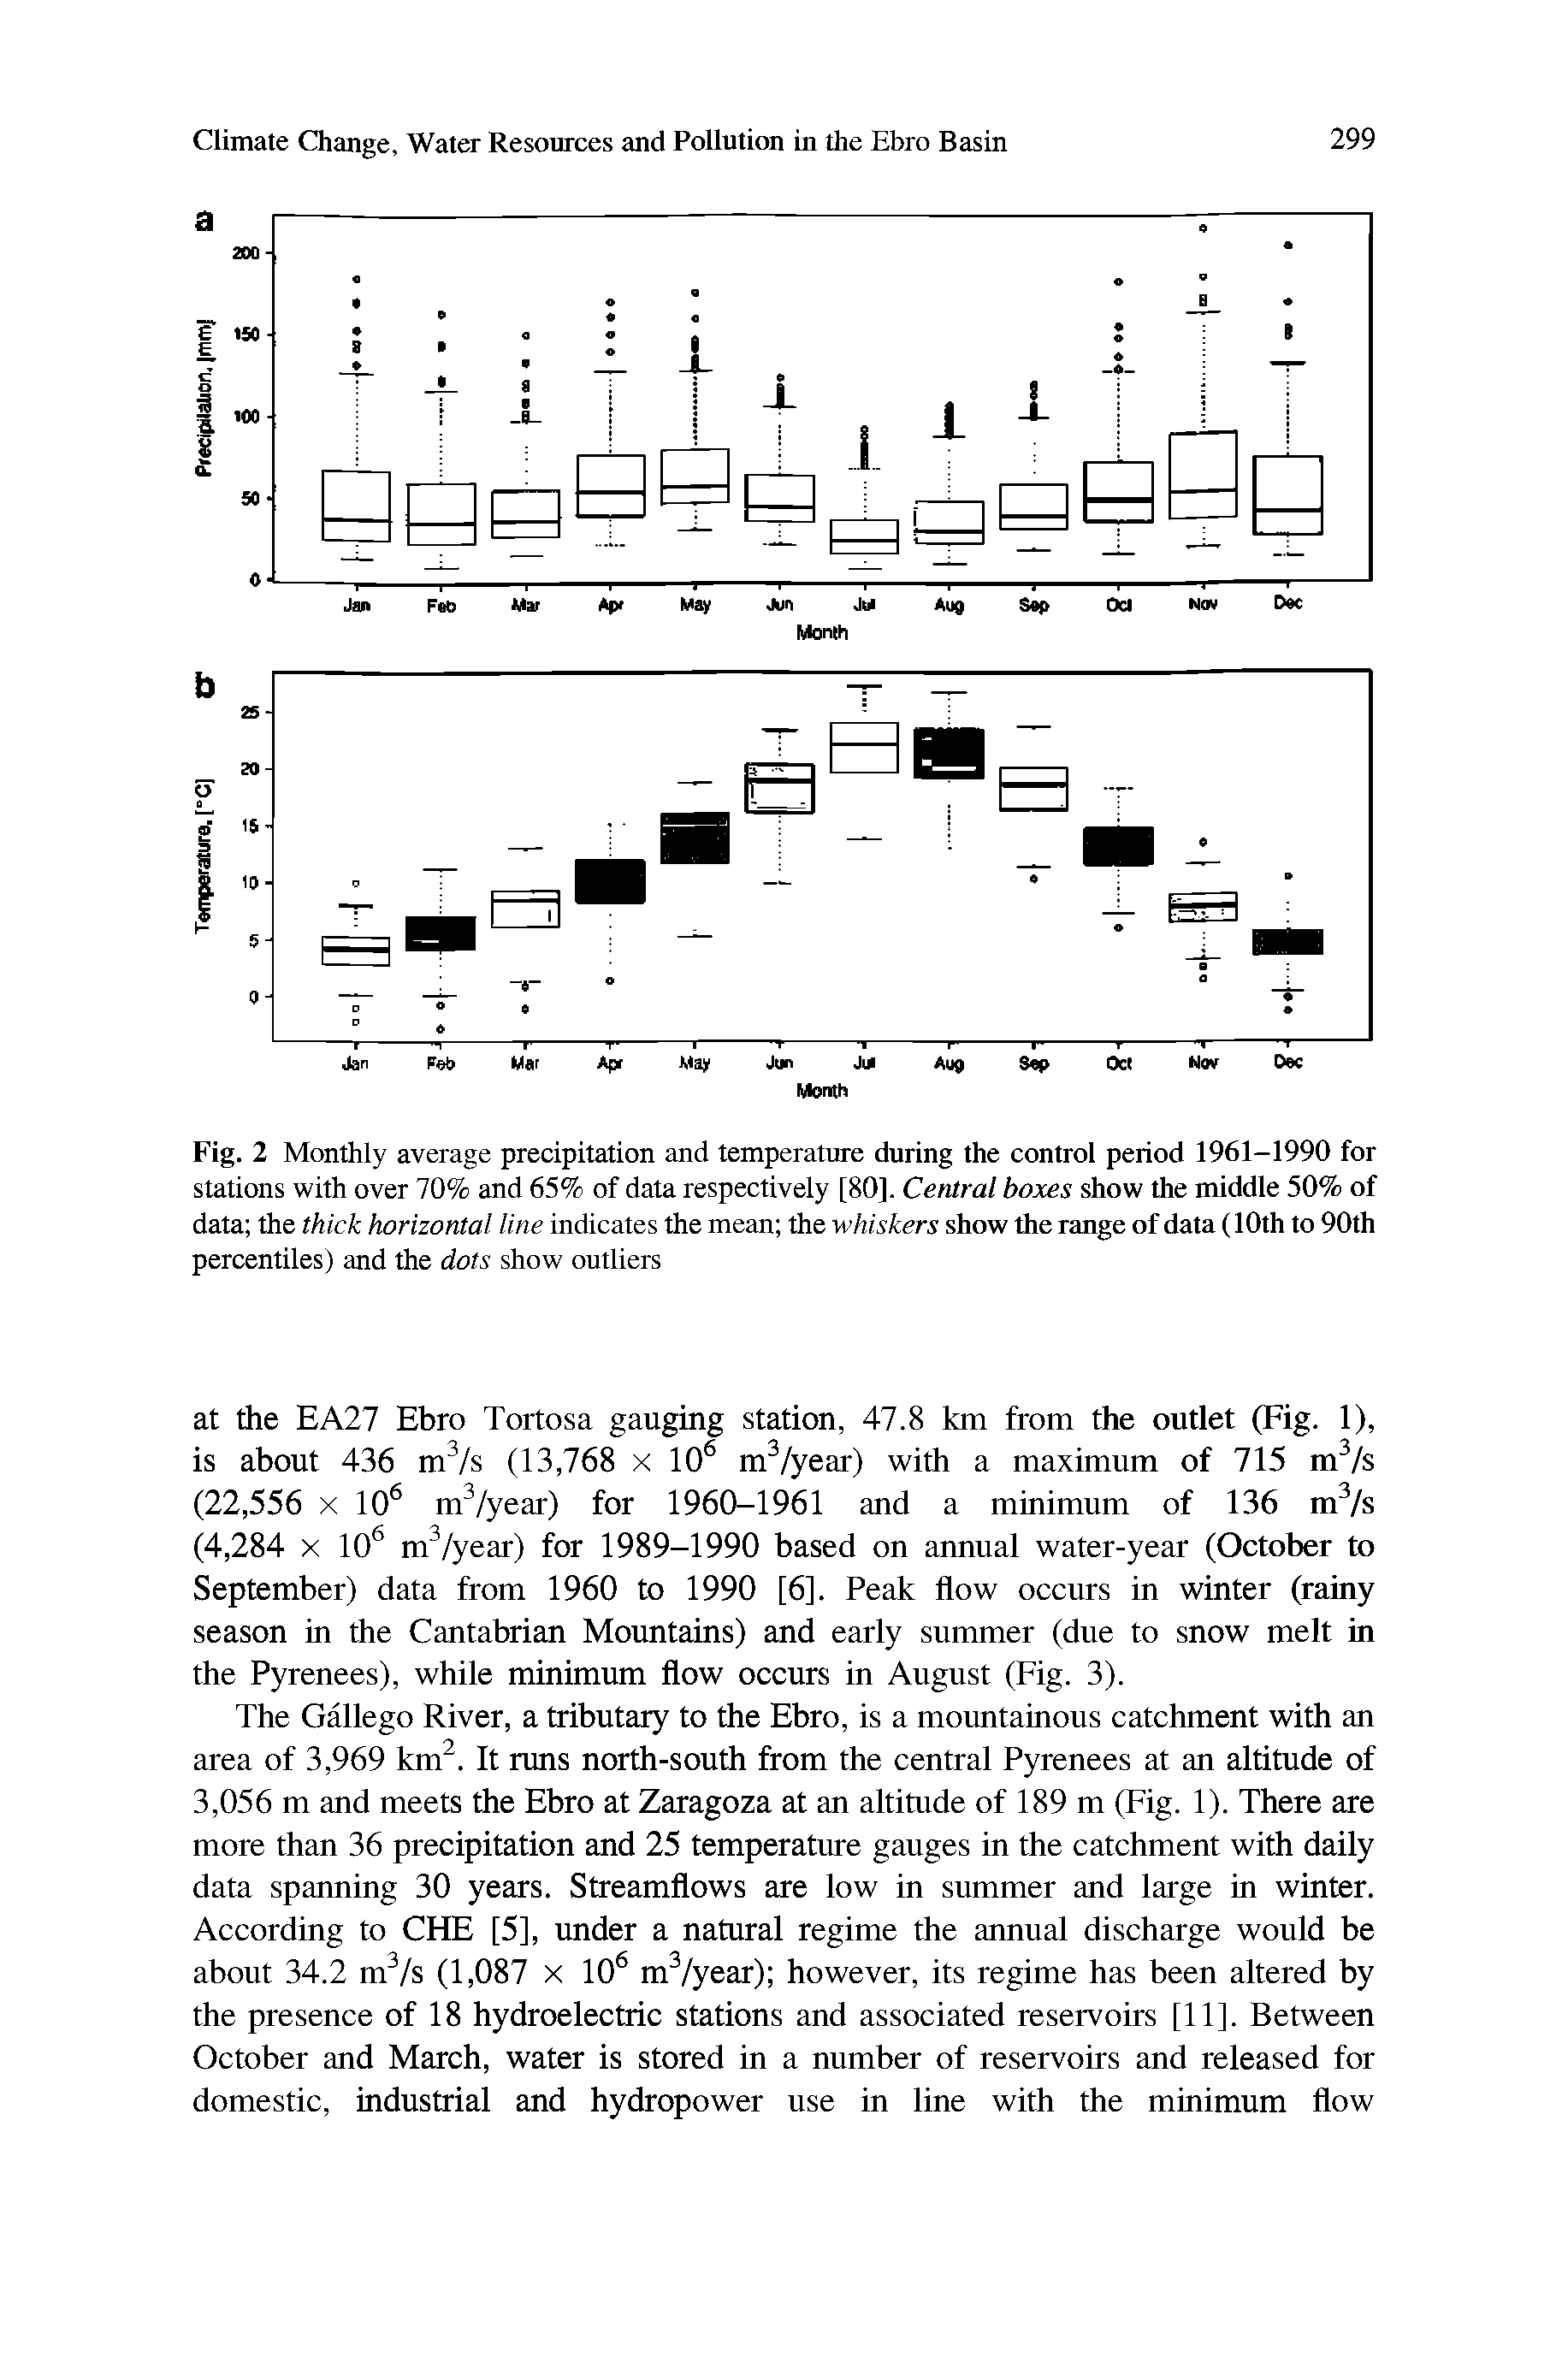 Fig. 2 Monthly average precipitation and temperature during the control period 1961-1990 for stations with over 70% and 65% of data respectively [80]. Central boxes show the middle 50% of data the thick horizontal line indicates the mean the whiskers show the range of data (10th to 90th percentiles) and the dots show outliers...